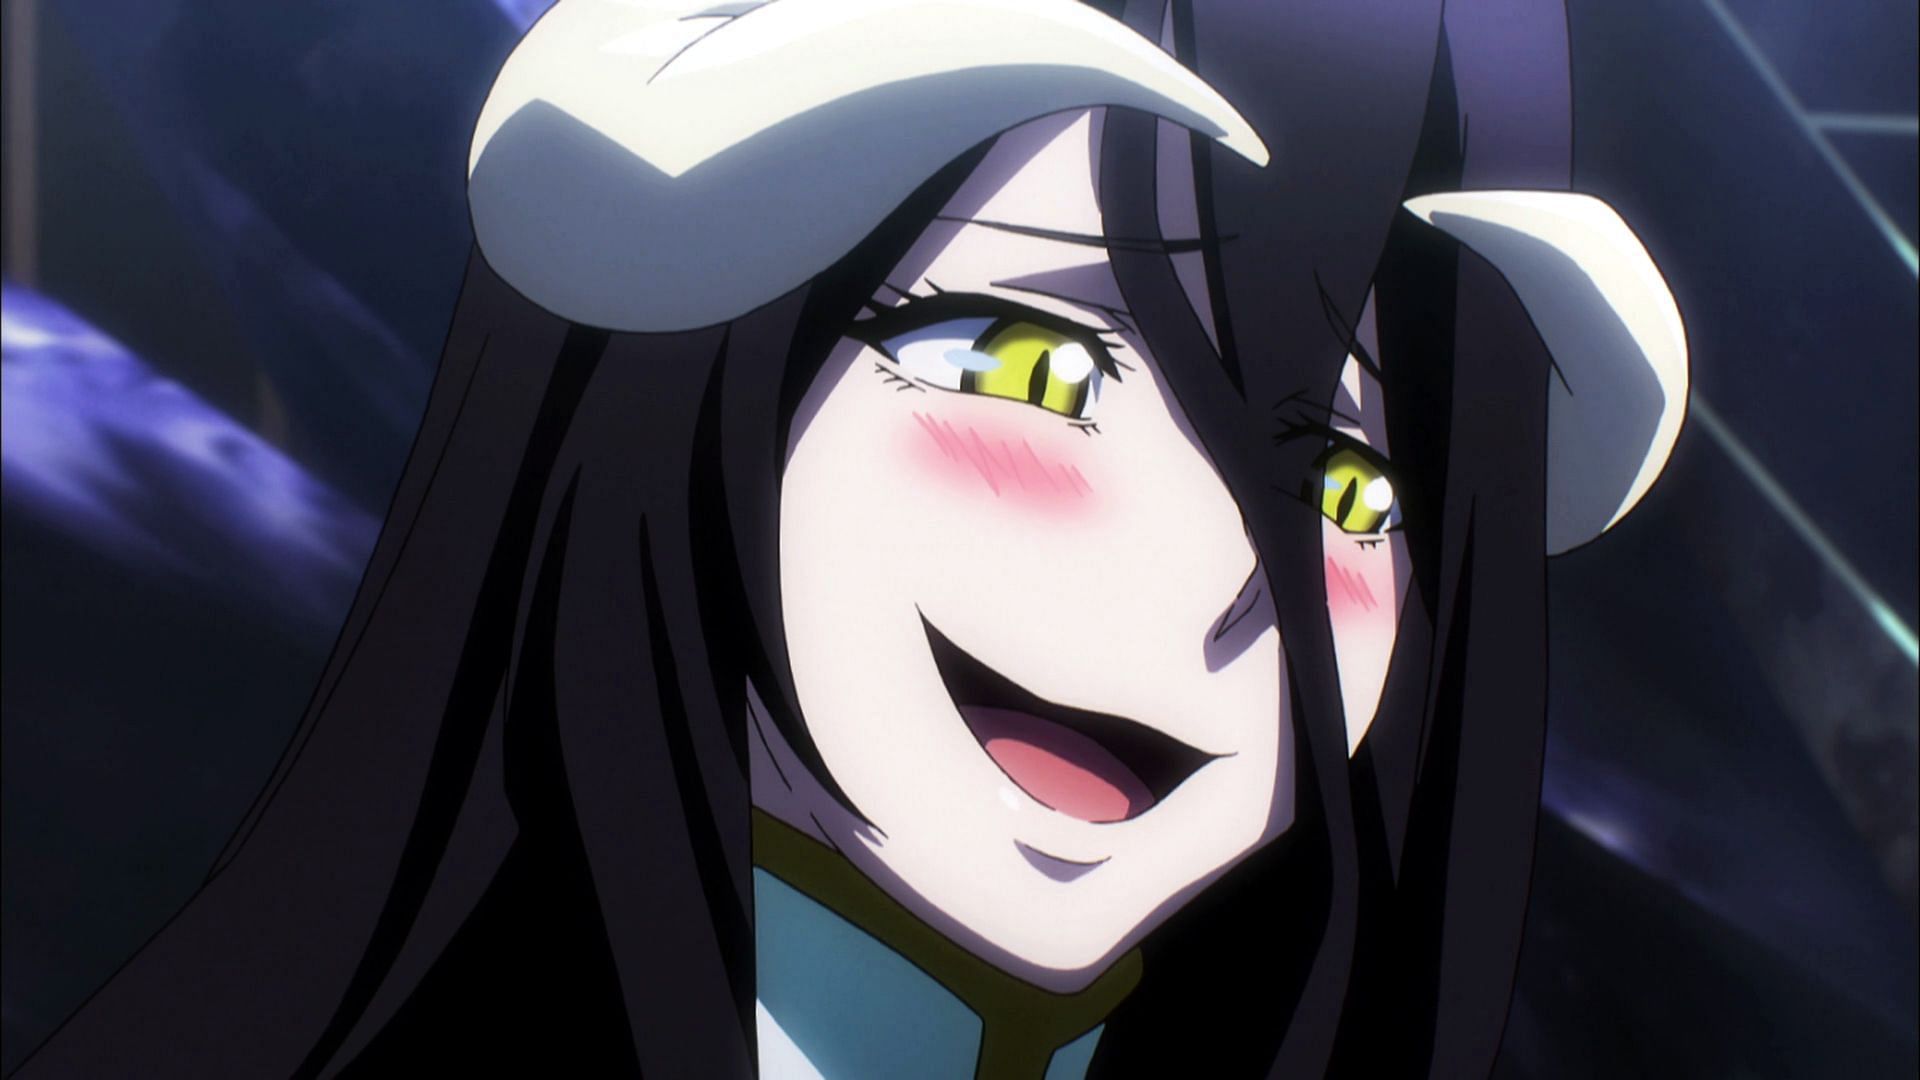 Albedo as shown in the anime (Image via Madhouse)